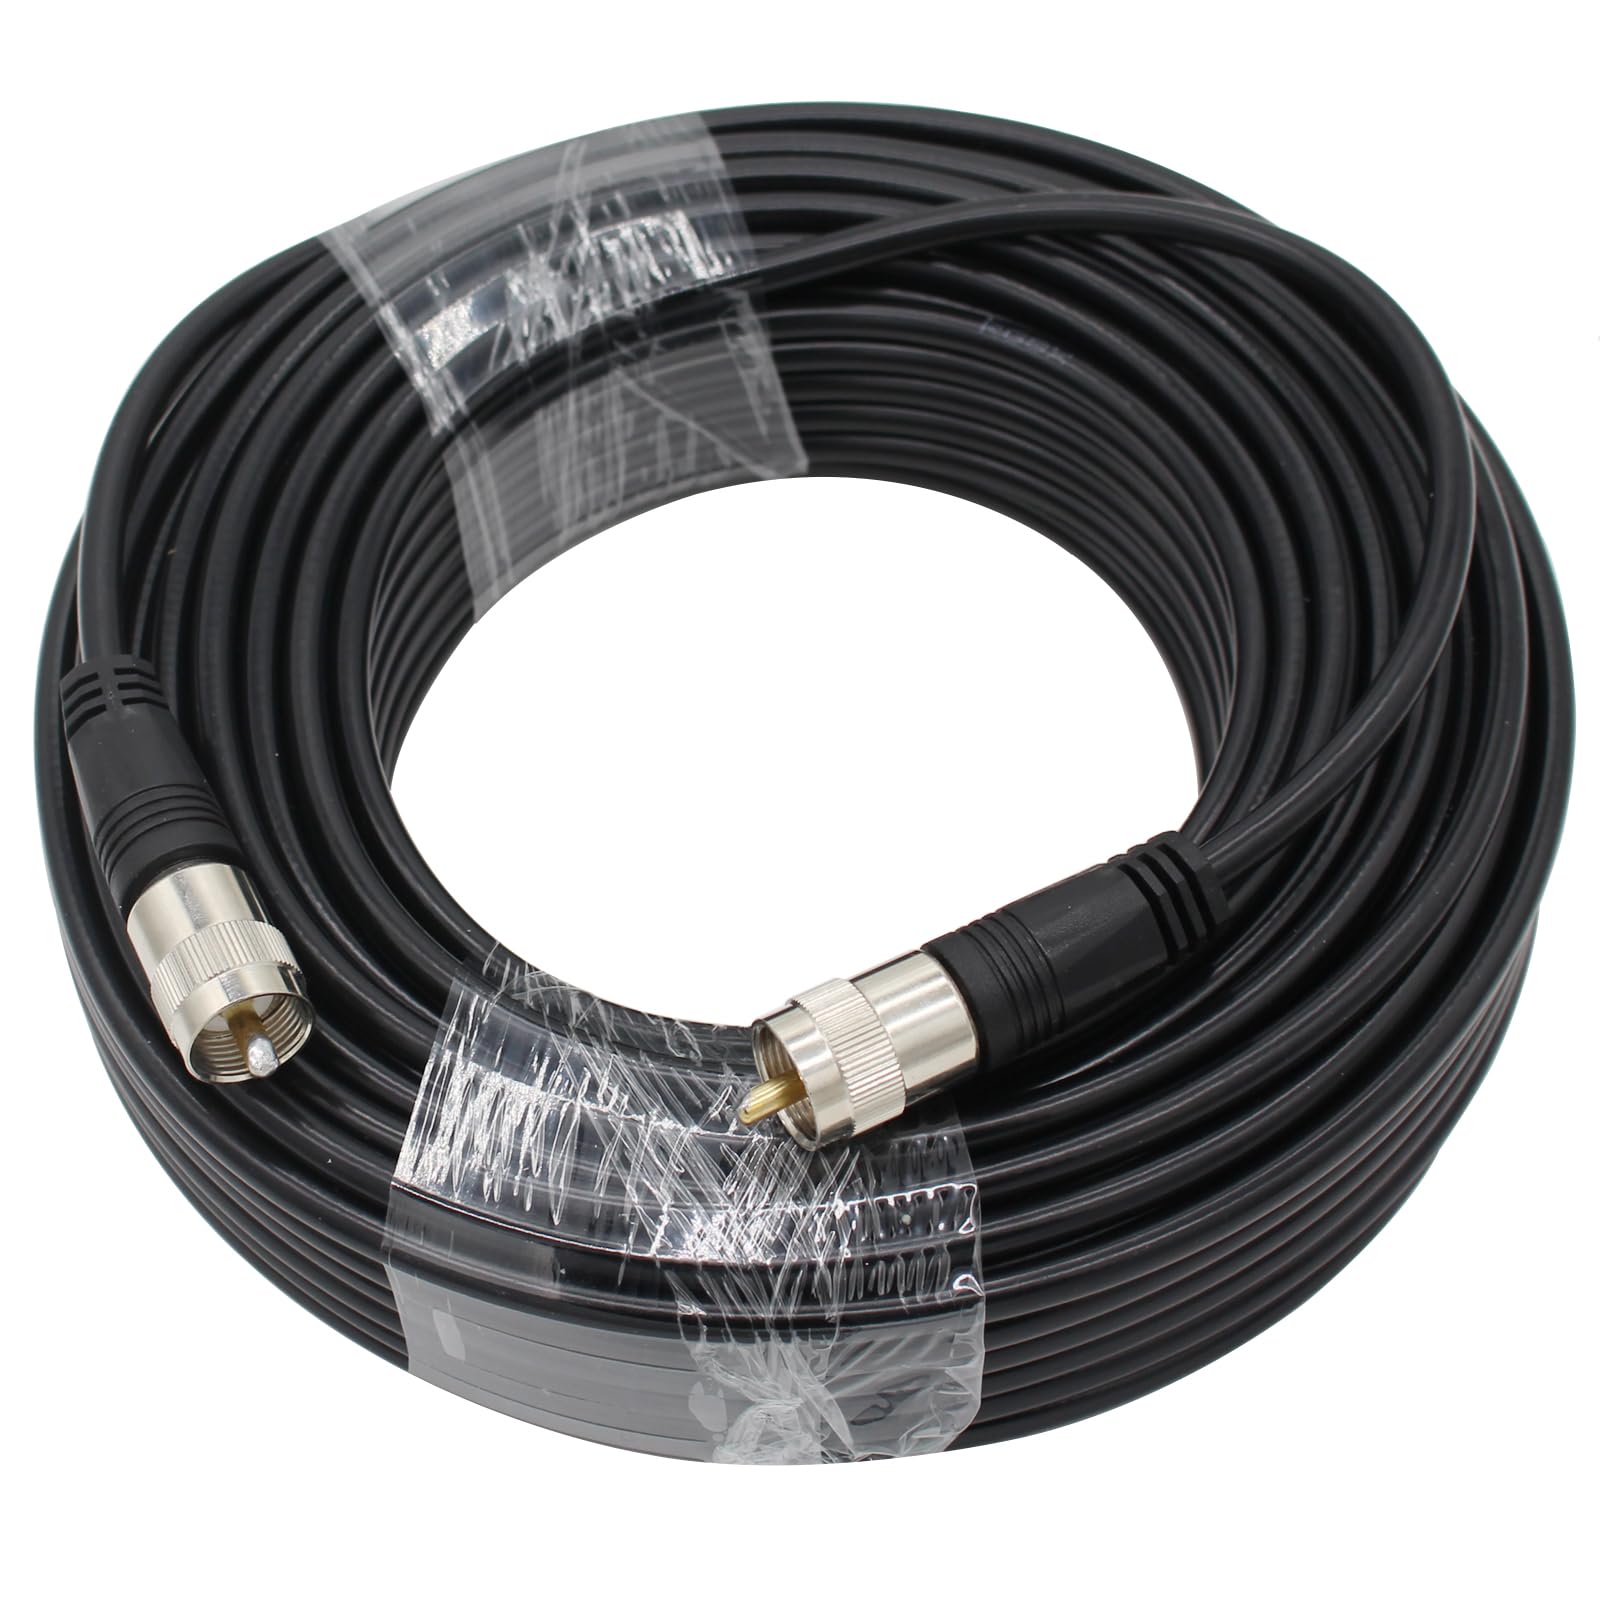 exgoofit RG8X Coaxial Cable 100ft, CB Coax Cable, UHF PL259 Male to Male Coaxial Cable Connector for HAM Radio, Antenna Analyzer